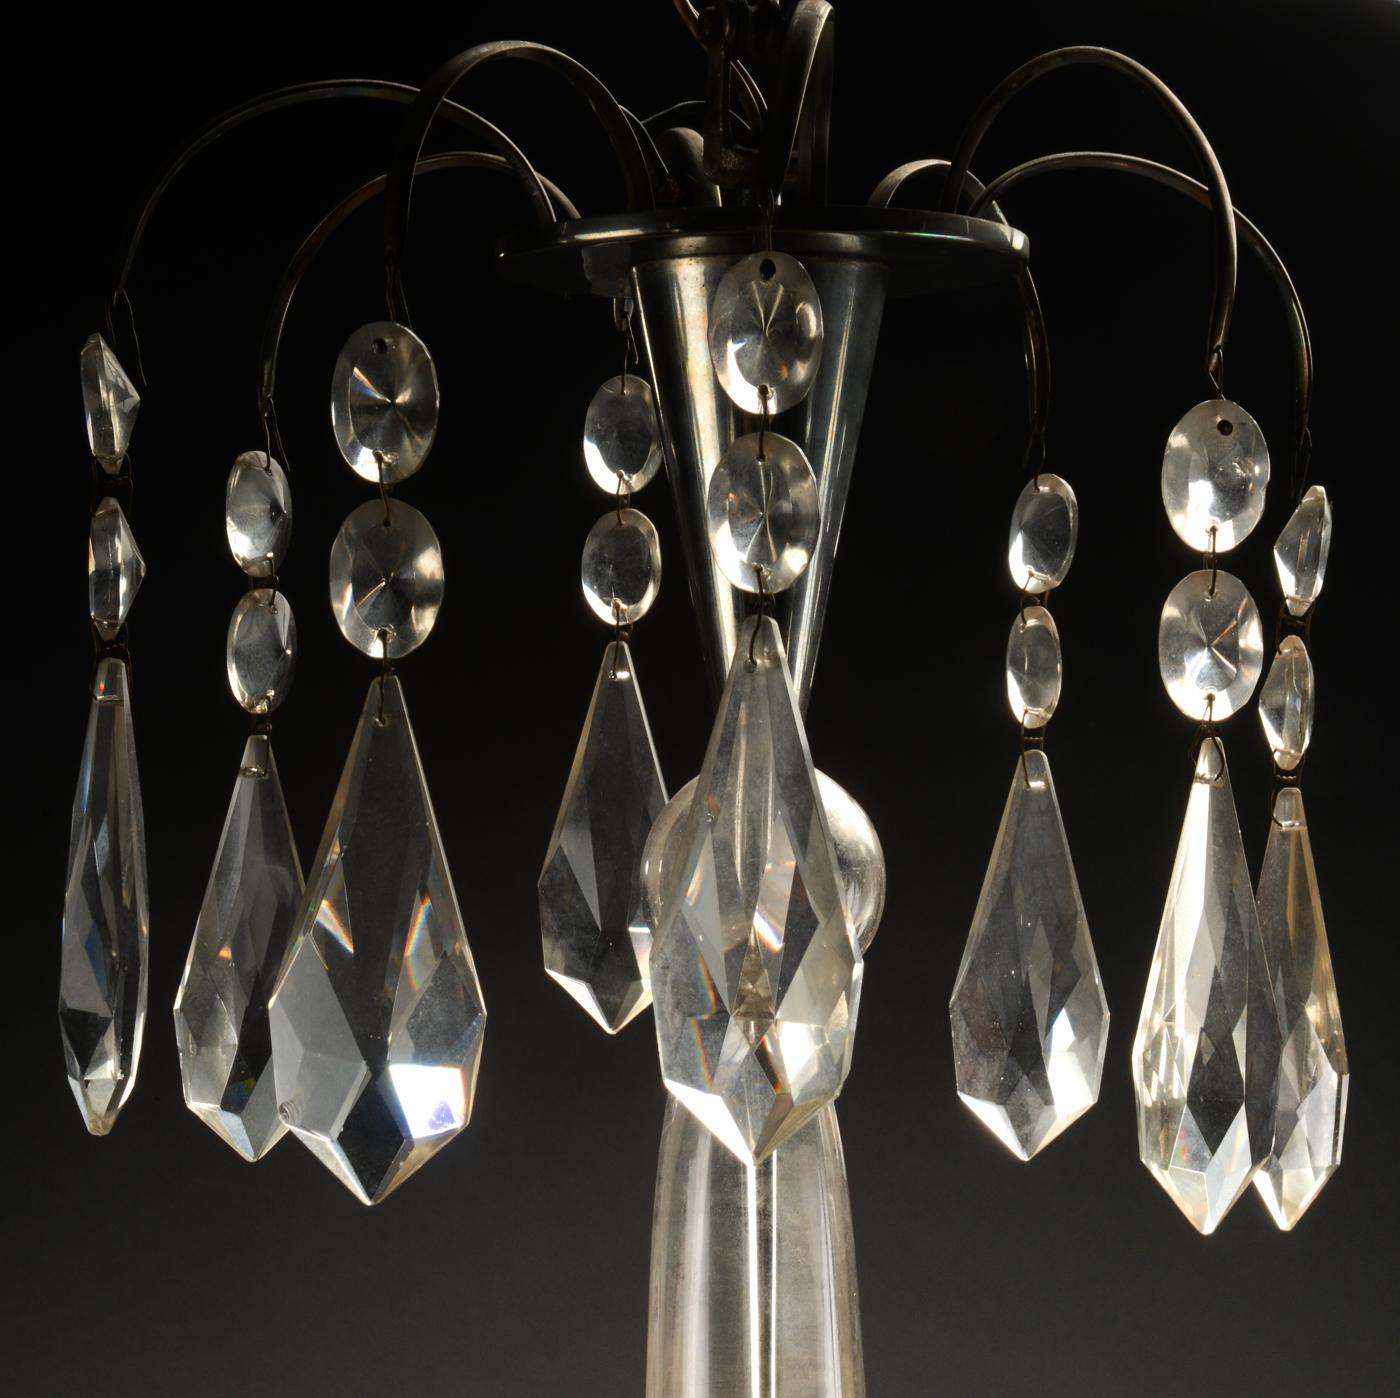 Beautiful French Art Deco chandelier from the 1920s with four light arms with shades of frosted glass with beam grinders, stem and prisms of glass, frame and top of nickel-plated metal.
Dimensions: H 94, Ø 40 cm.
Original condition with four